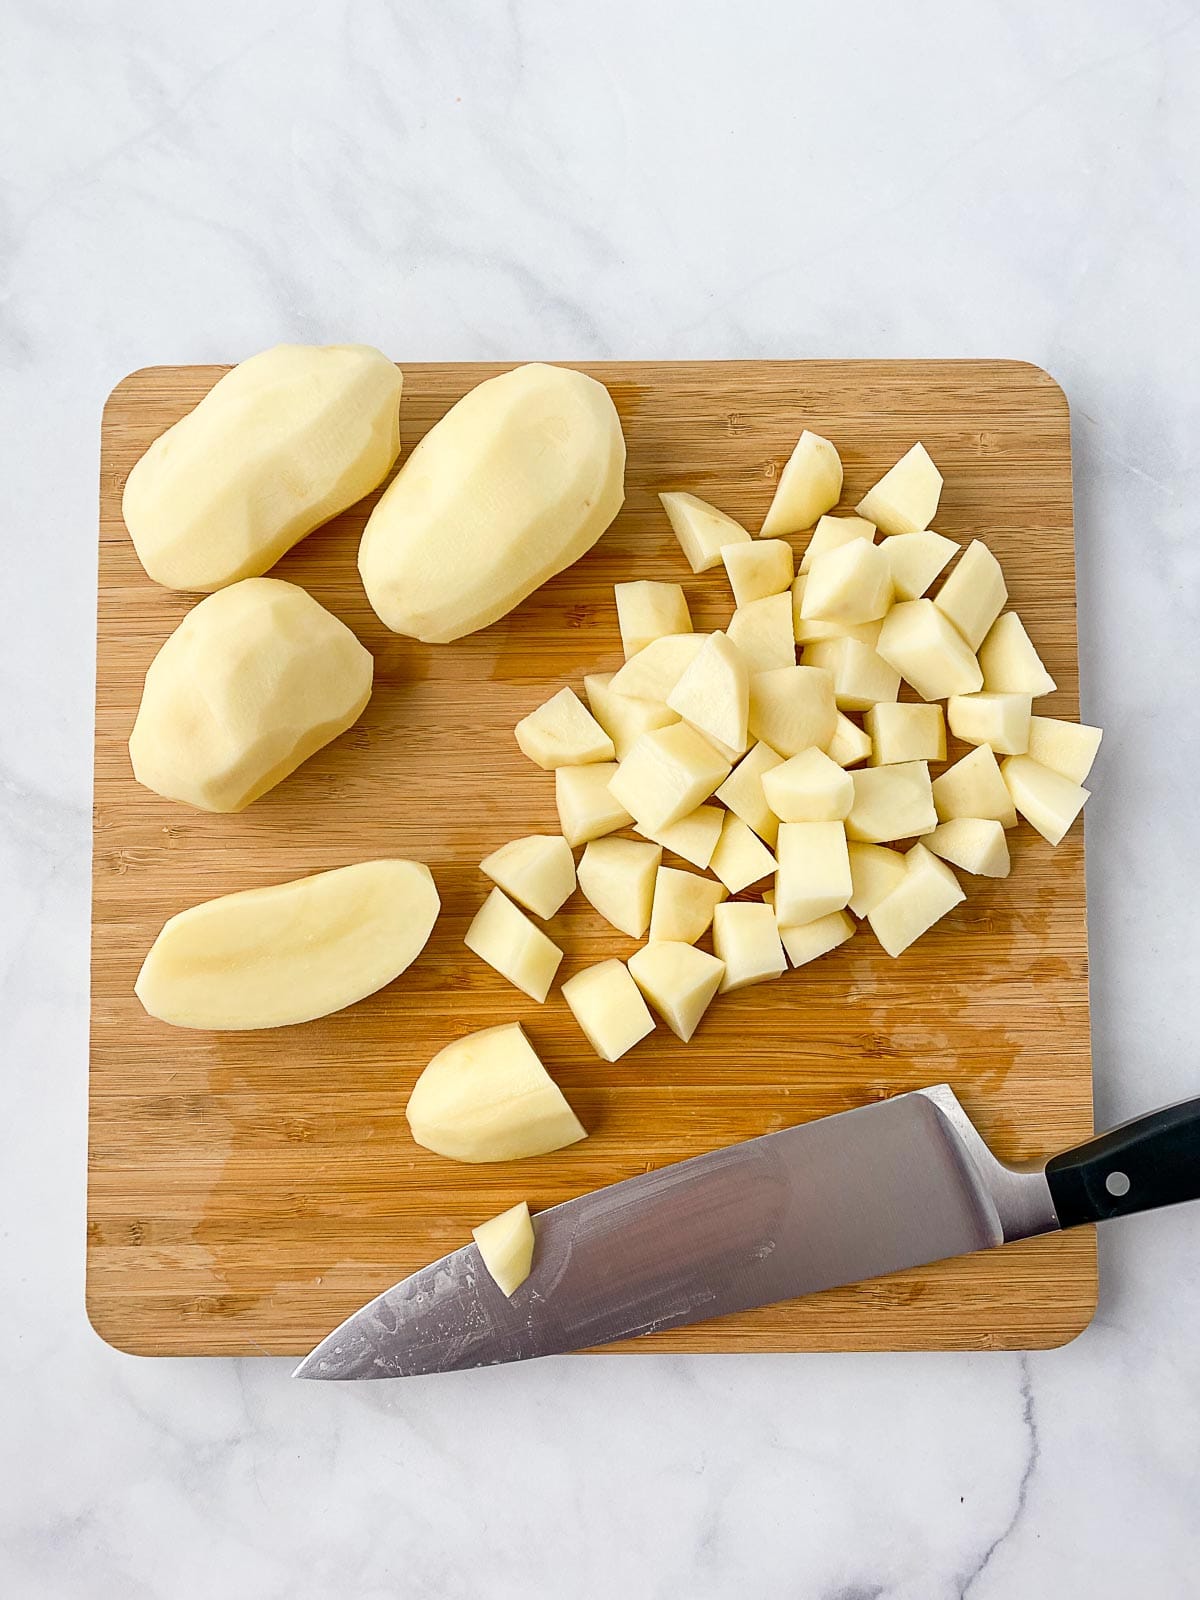 Whole and diced potatoes on a wooden cutting board.